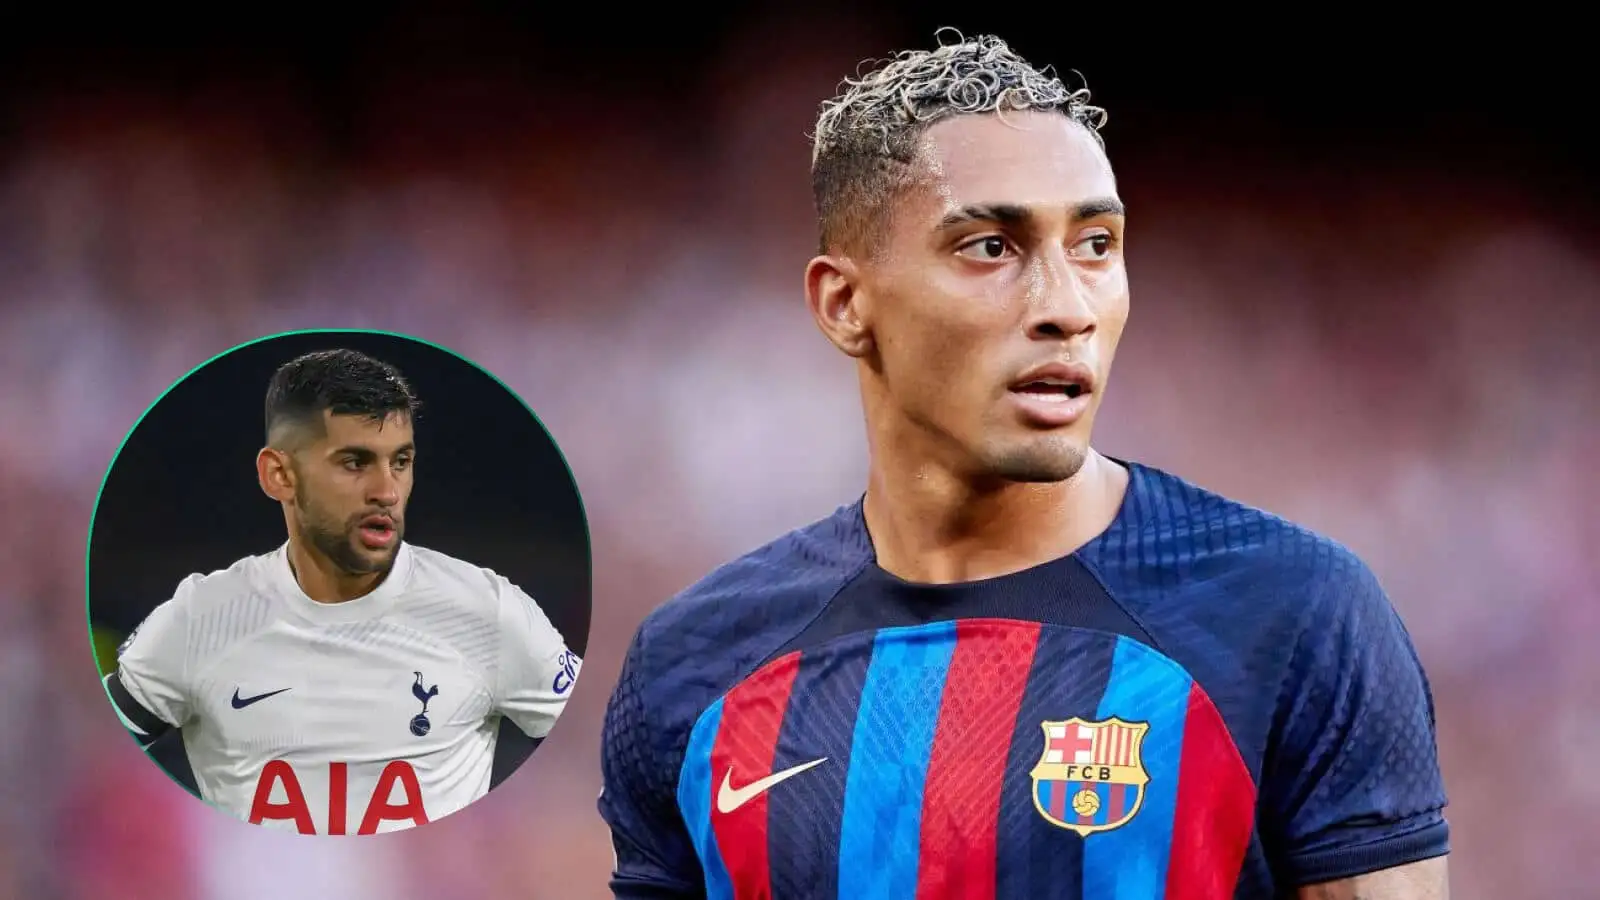 Barcelona star Raphinha and Cristian Romero of Tottenham could reportedly swap clubs